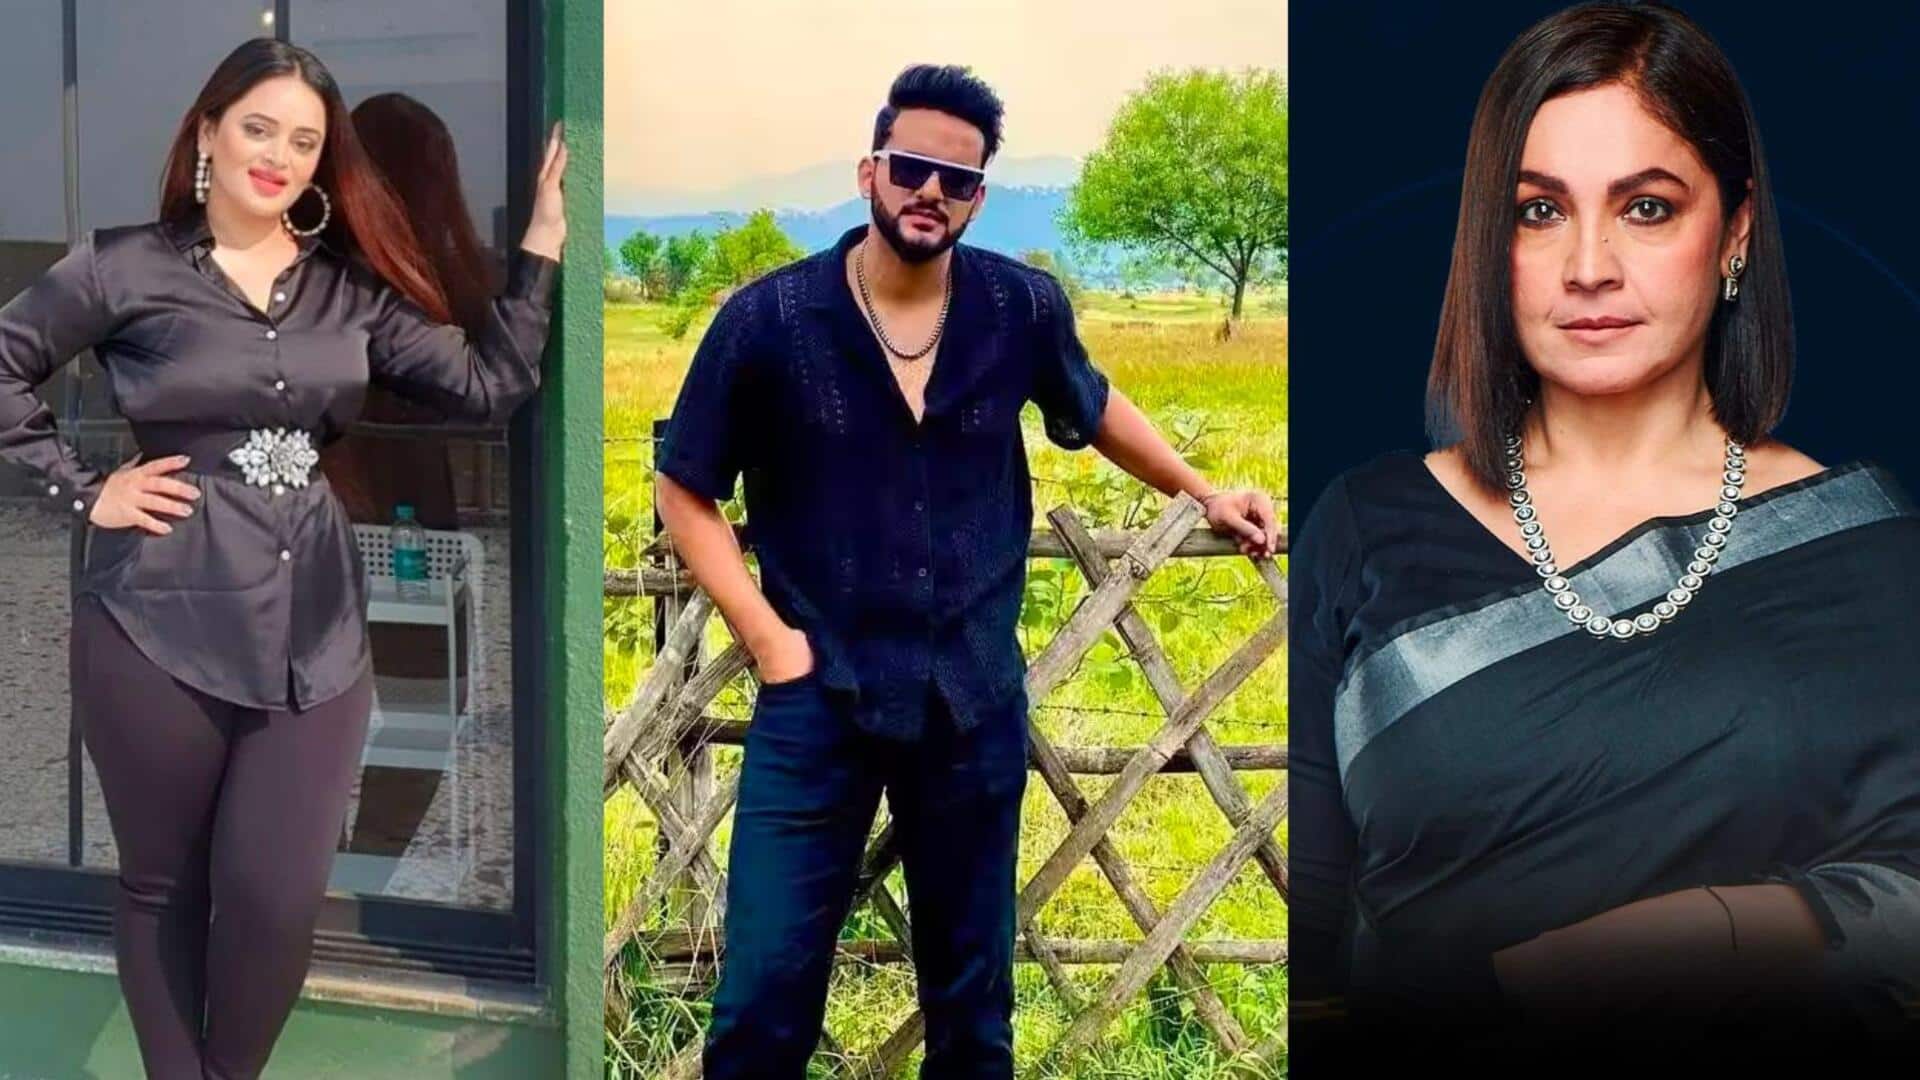 #BiggBossOTT2: After shocking double eviction, these are the remaining contestants